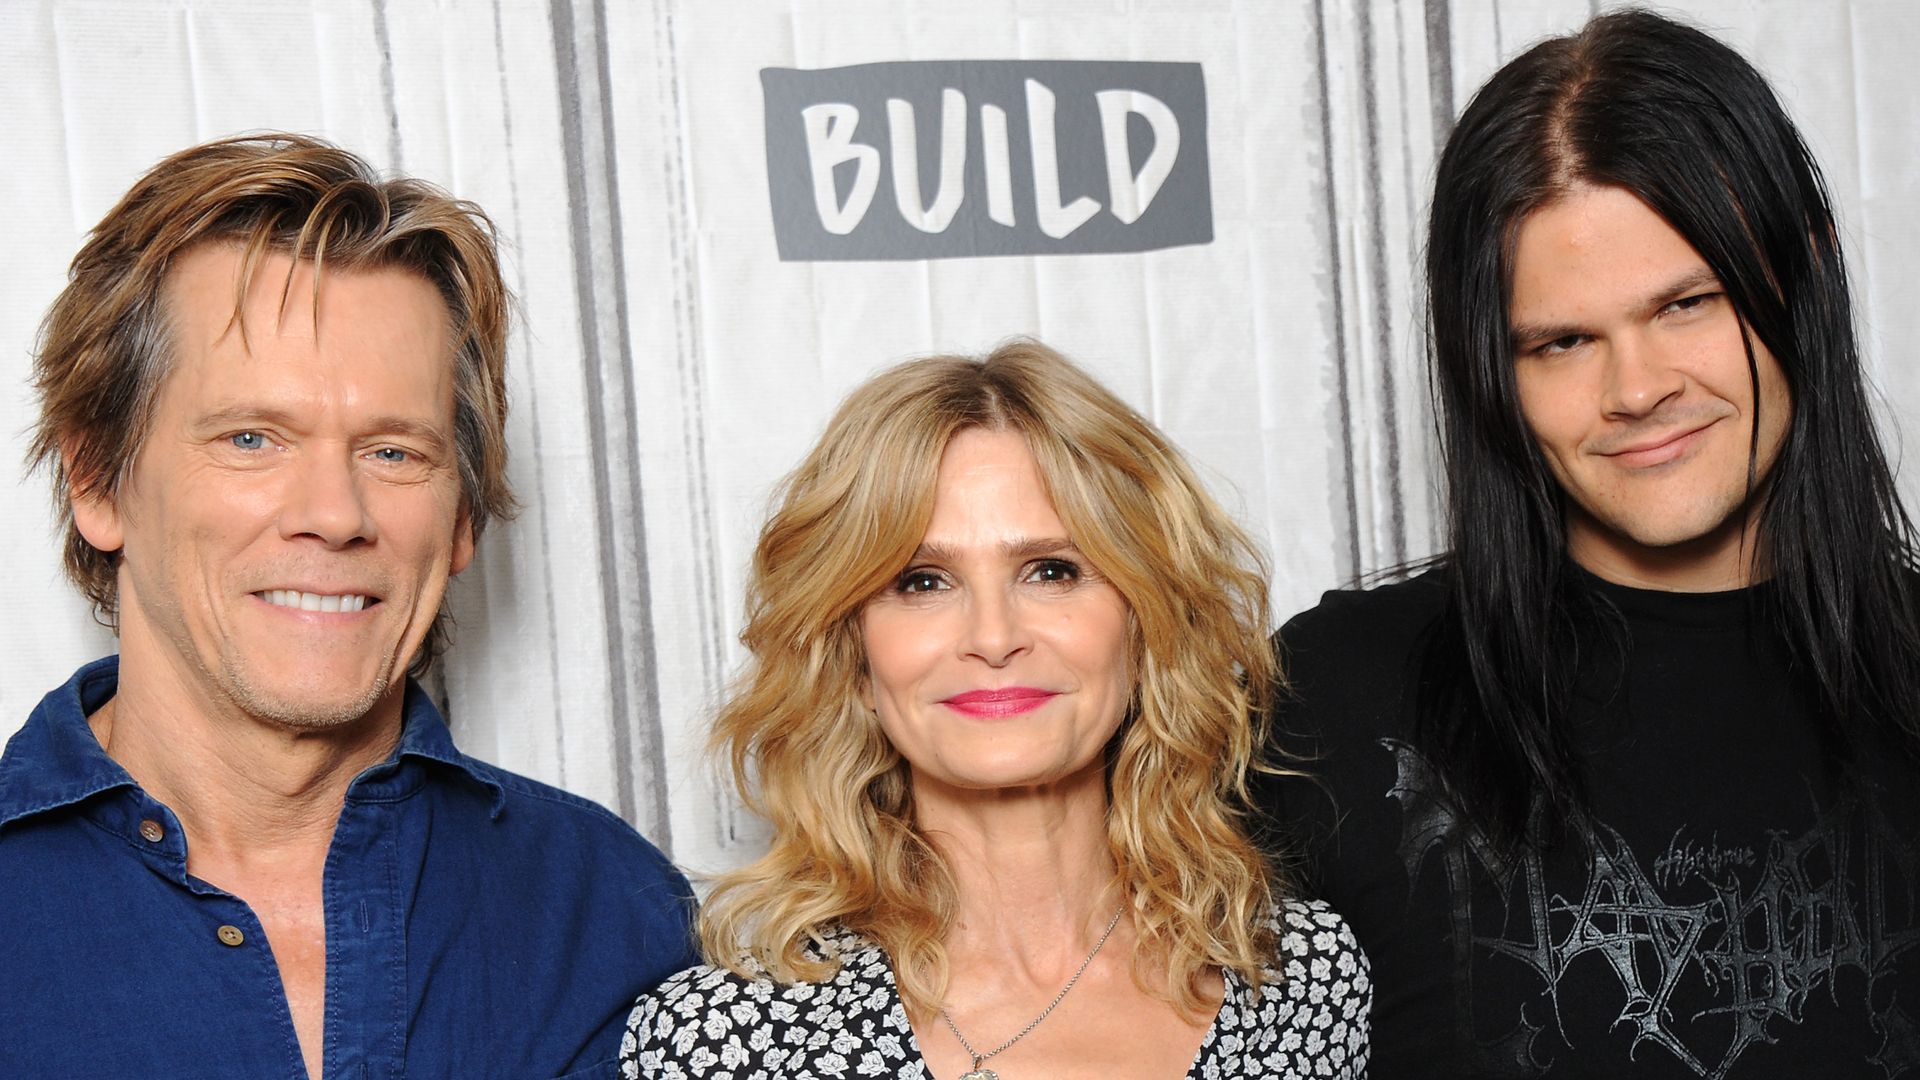 Kevin Bacon, Kyra Sedgwick and Travis Bacon attend Build previewing the new Lifetime film 'Story of a Girl' at Build Studio on July 21, 2017